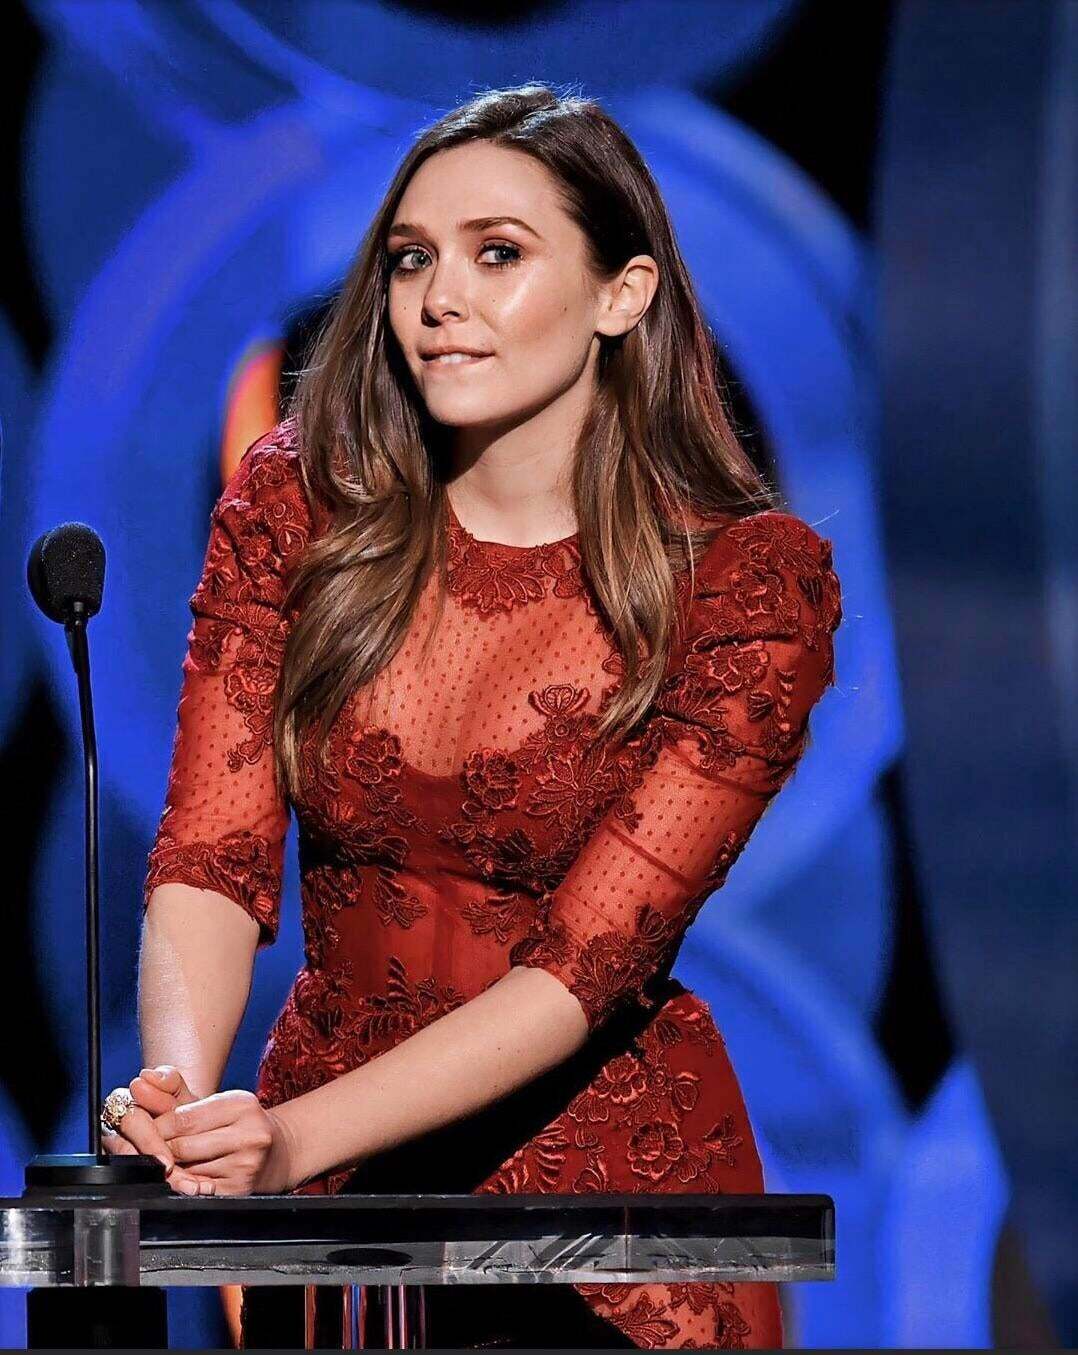 Could Elizabeth Olsen be any cuter?😍😍 She sure can fill out a dress and those boobs😍🤤 I’d love to bury my face in them